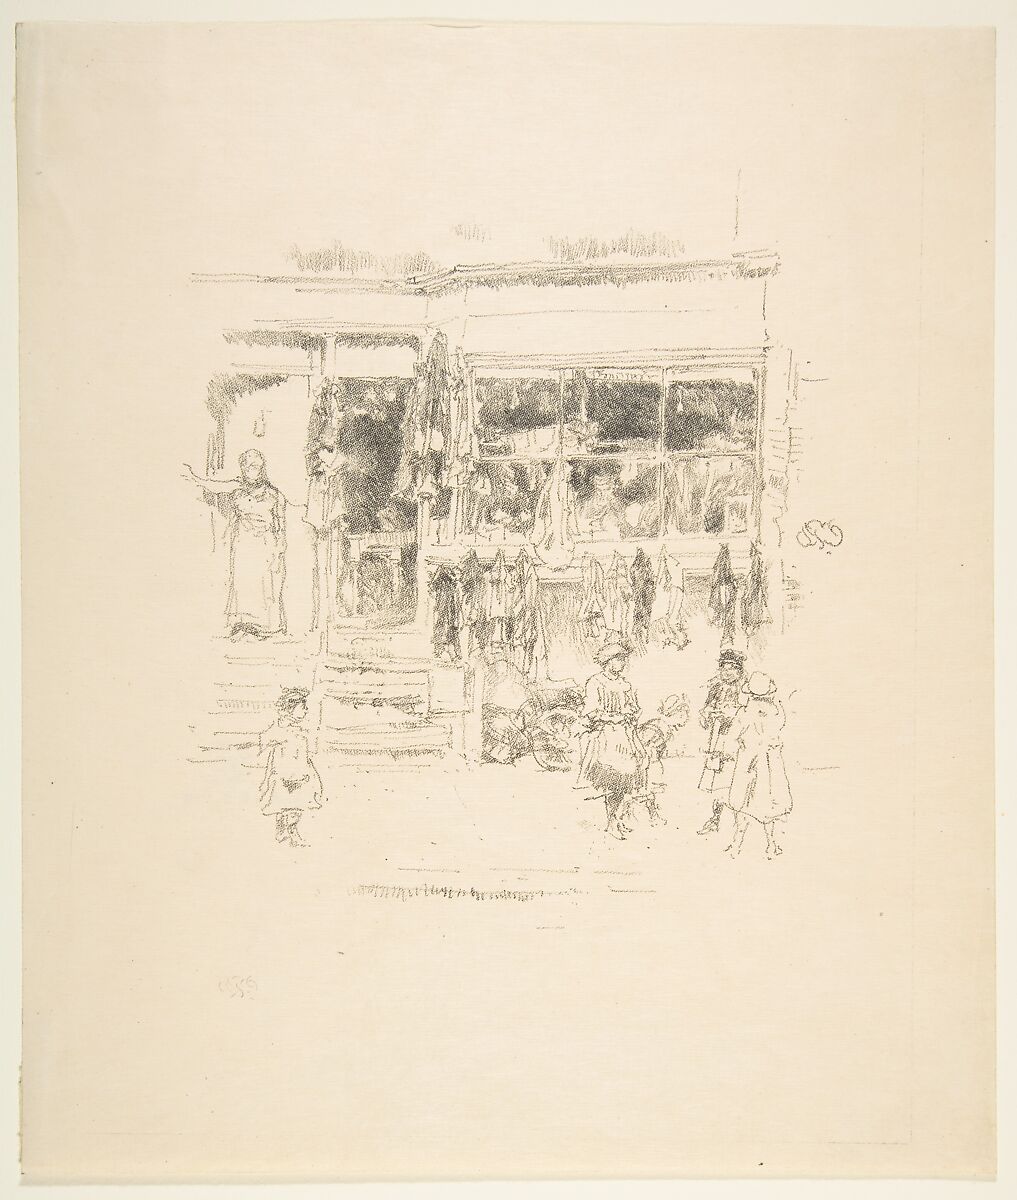 Chelsea Rags, James McNeill Whistler (American, Lowell, Massachusetts 1834–1903 London), Transfer lithograph, printed in black ink on cream India wove; only state (Chicago) 